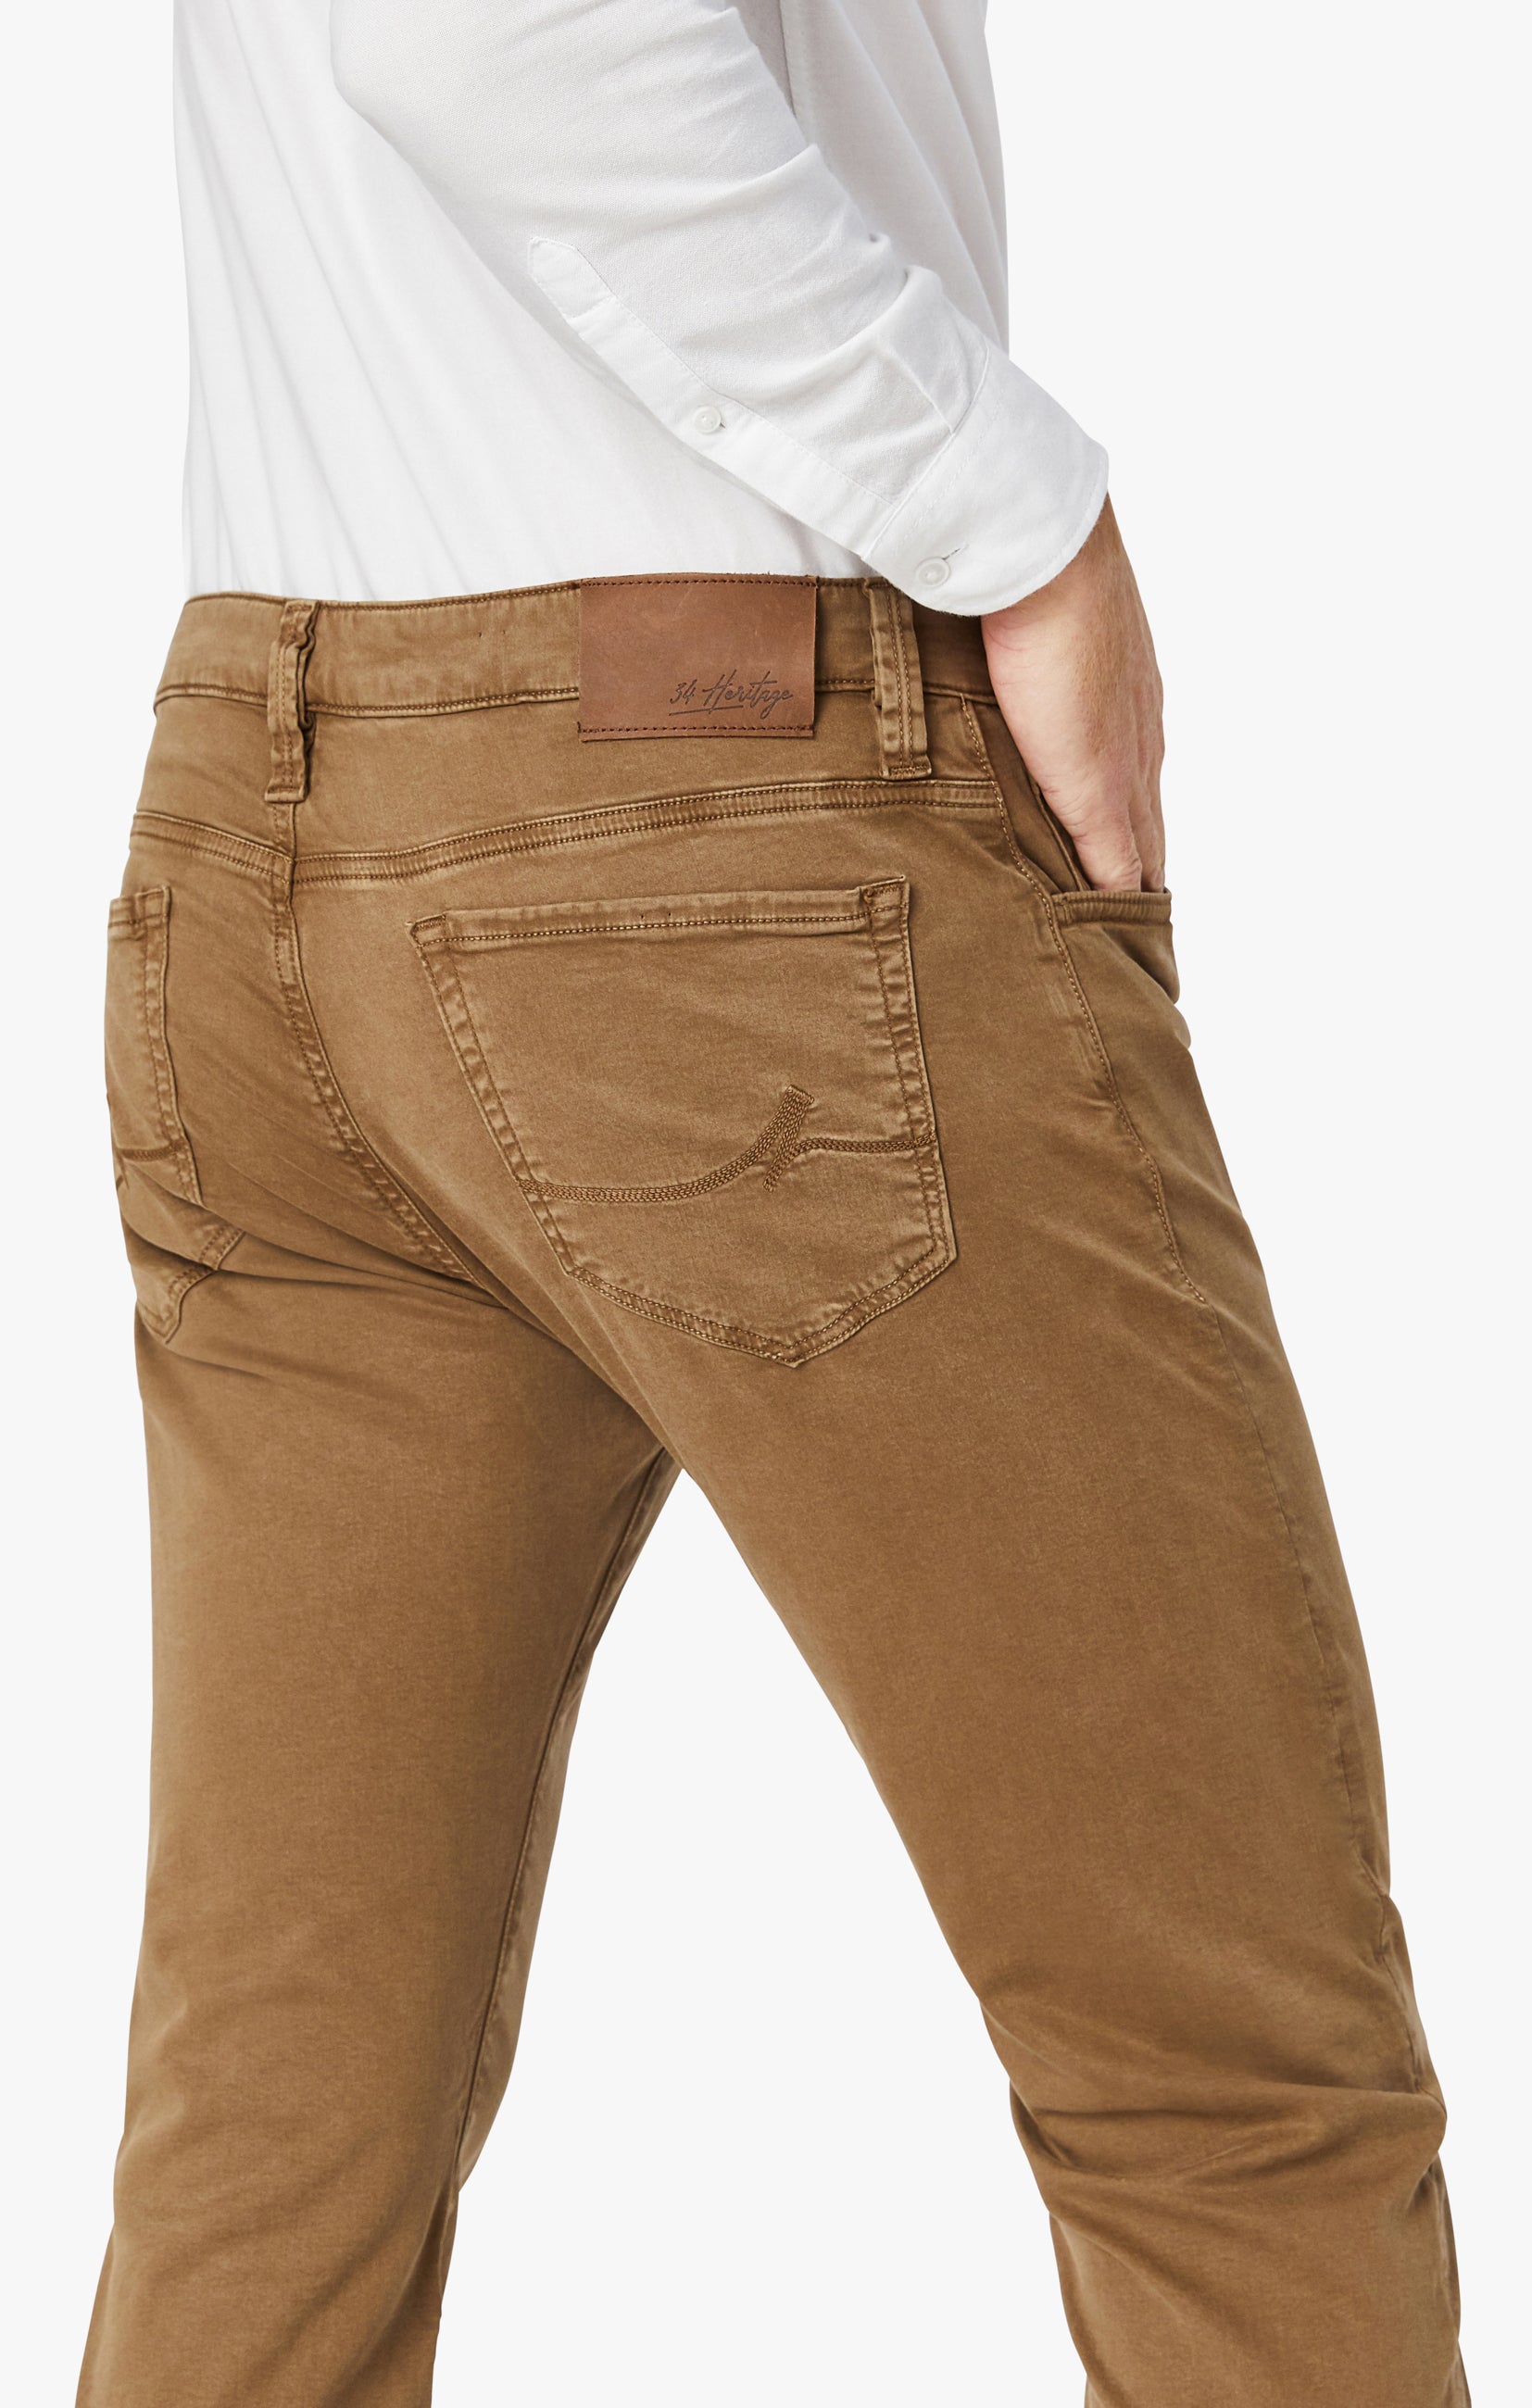 Cool Tapered Leg Pants In Tobacco Twill Image 3